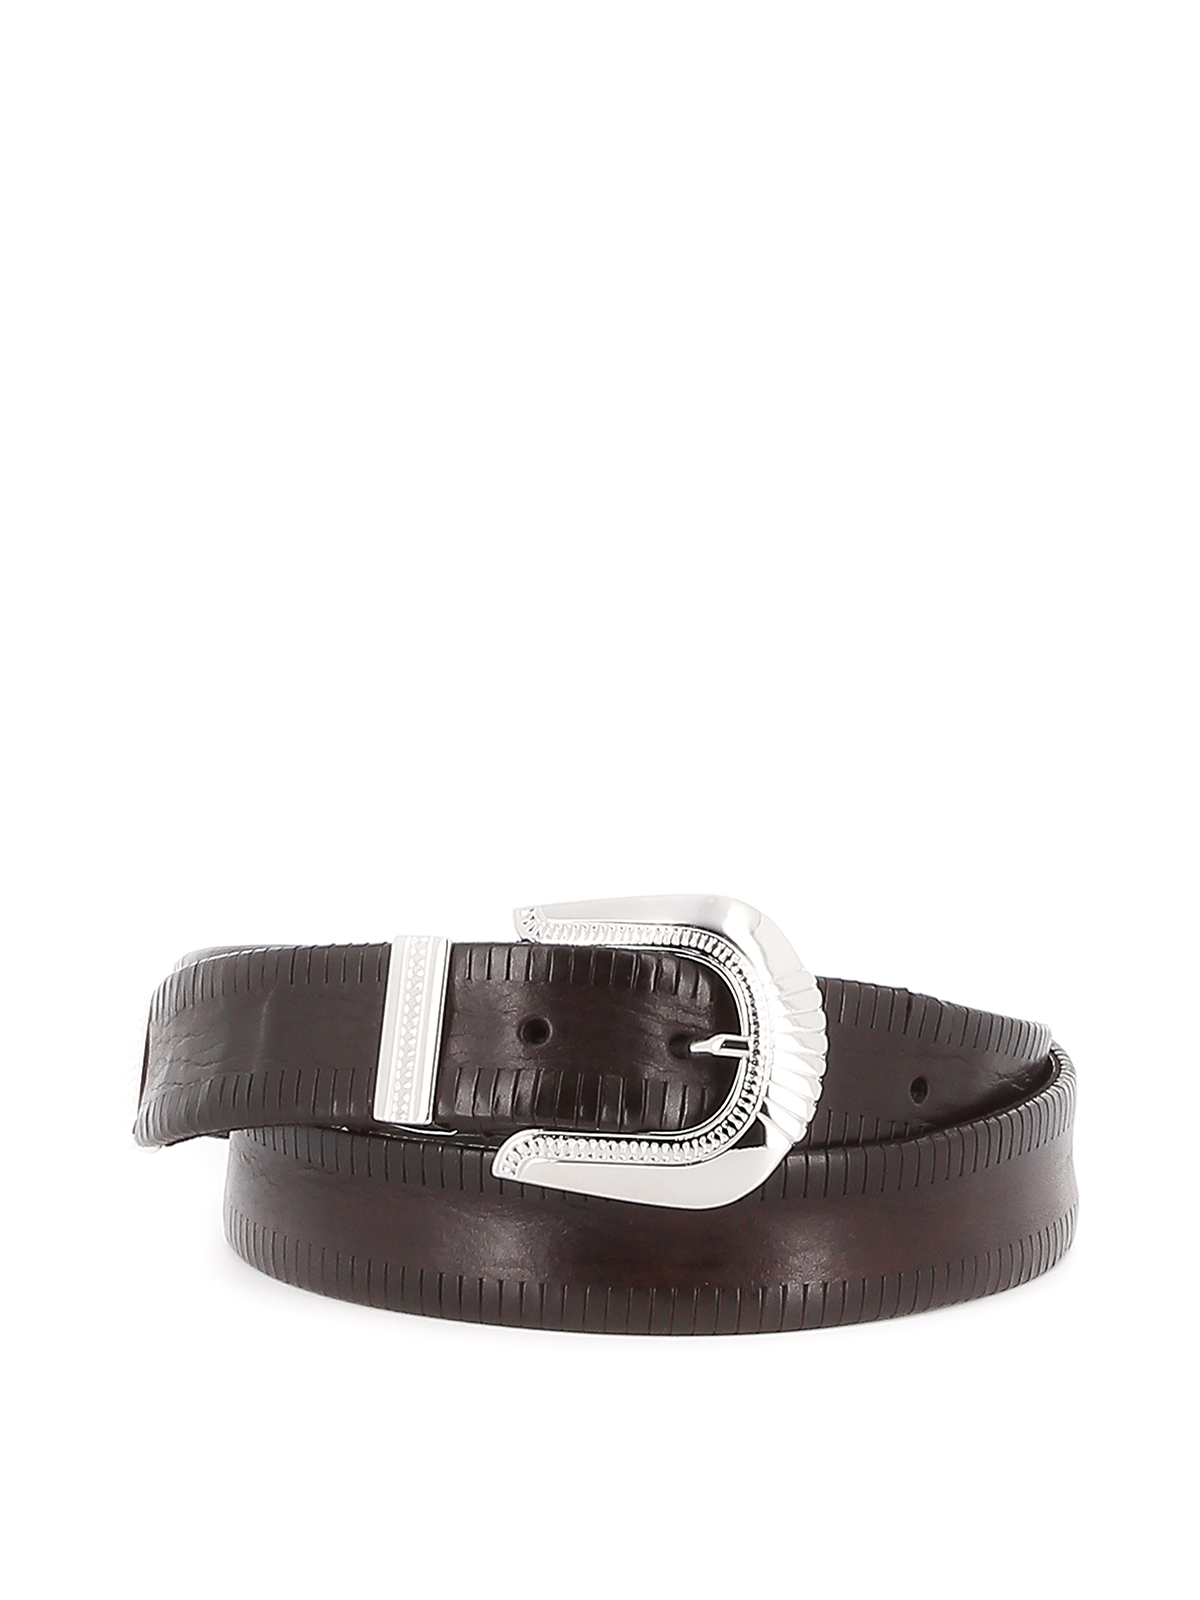 ANDERSON'S DEEP BROWN LEATHER BELT